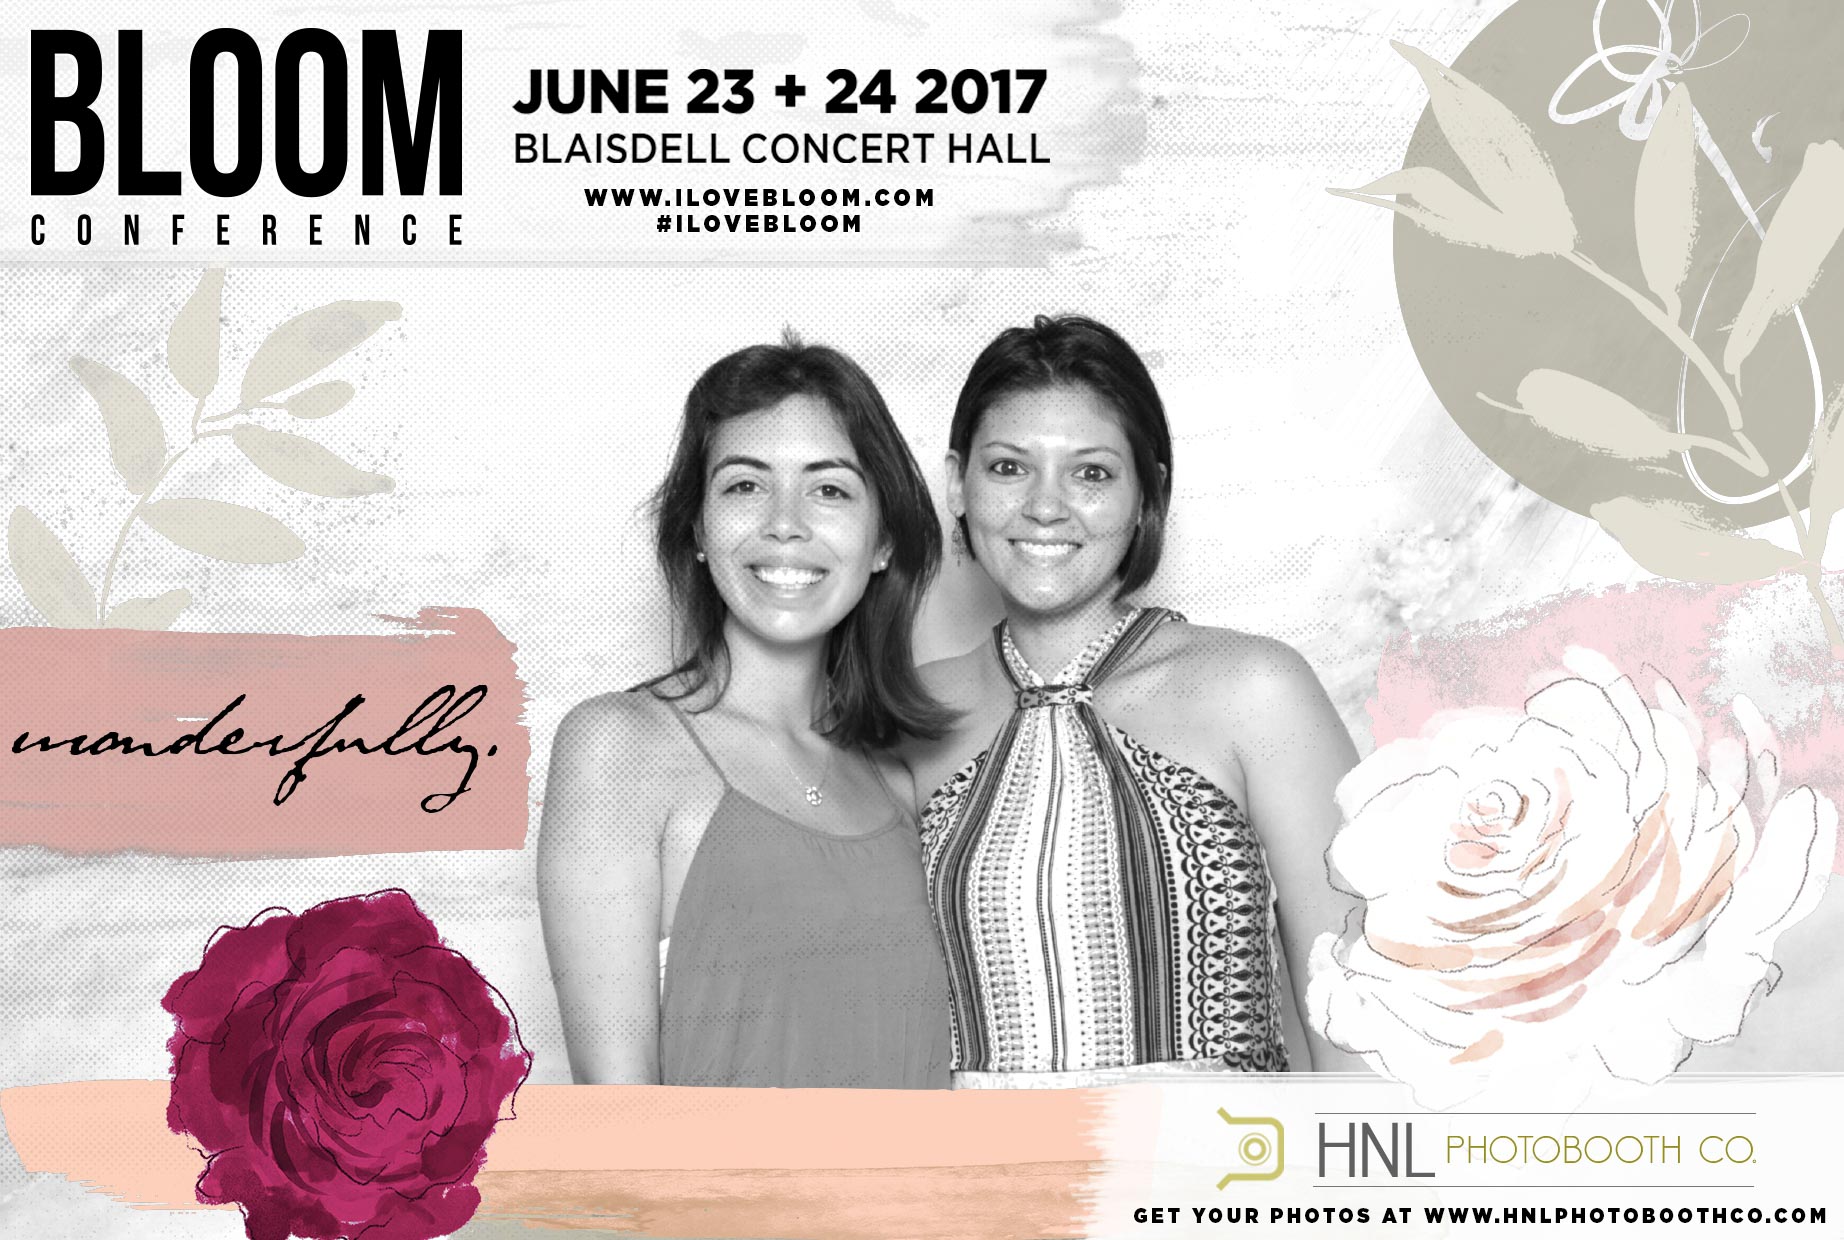 Bloom Conference Blaisdell Concert Hall Oahu Hawaii Photo Booth NEW-101.jpg